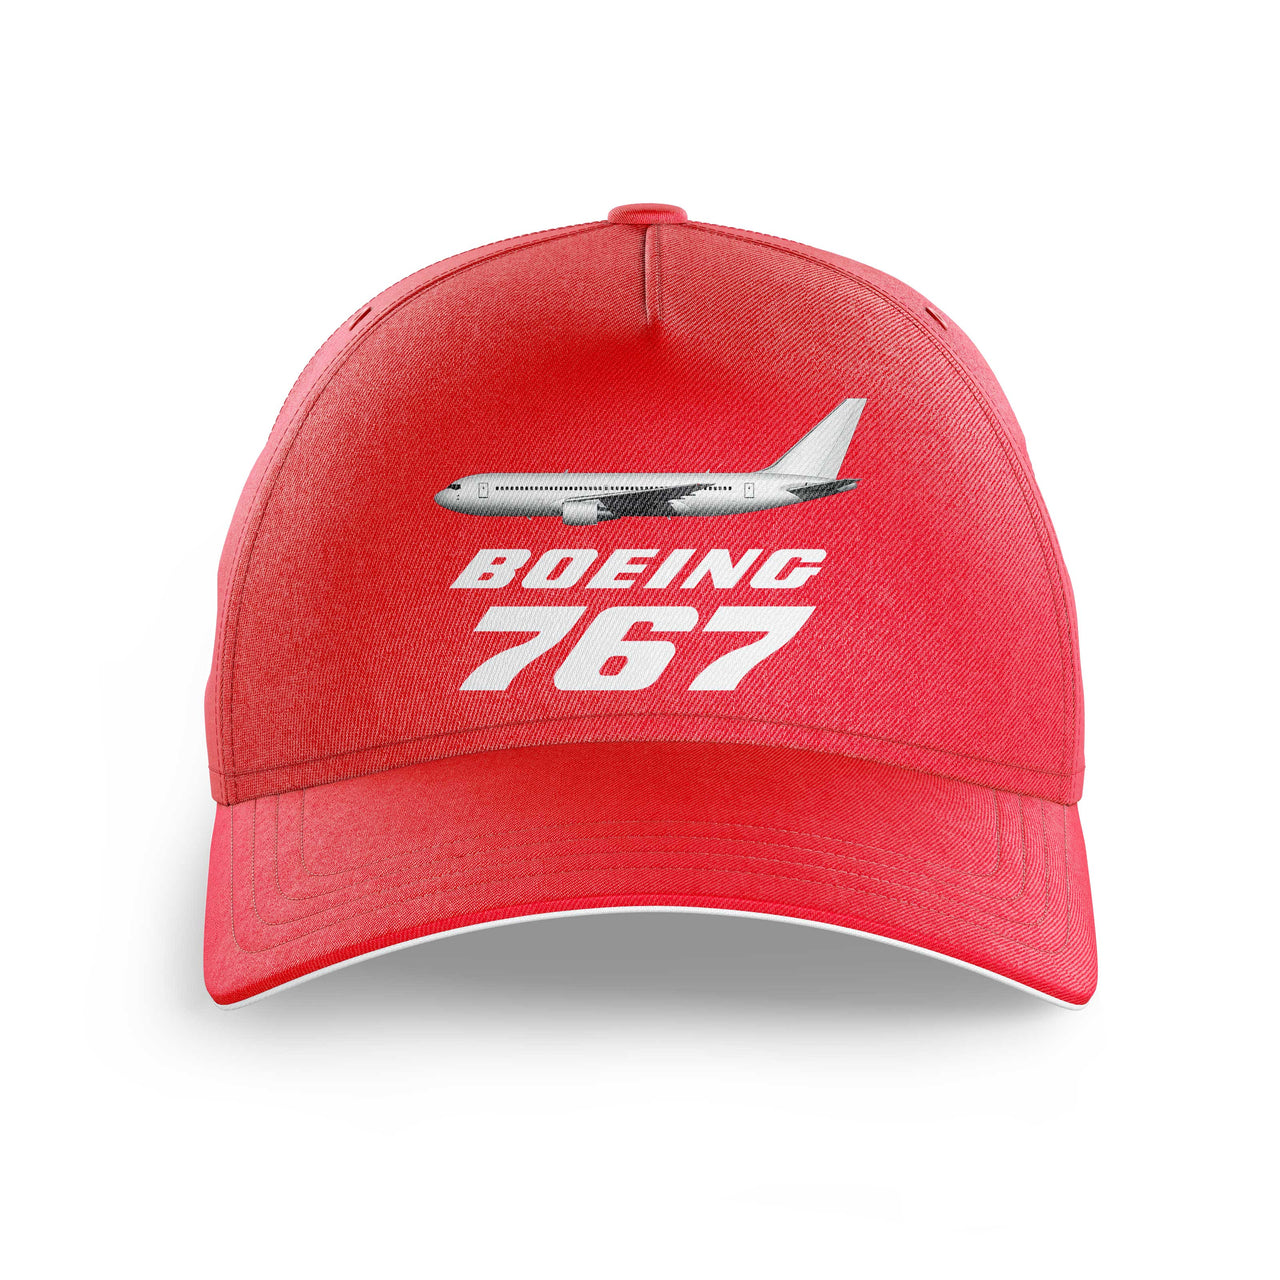 The Boeing 767 Printed Hats